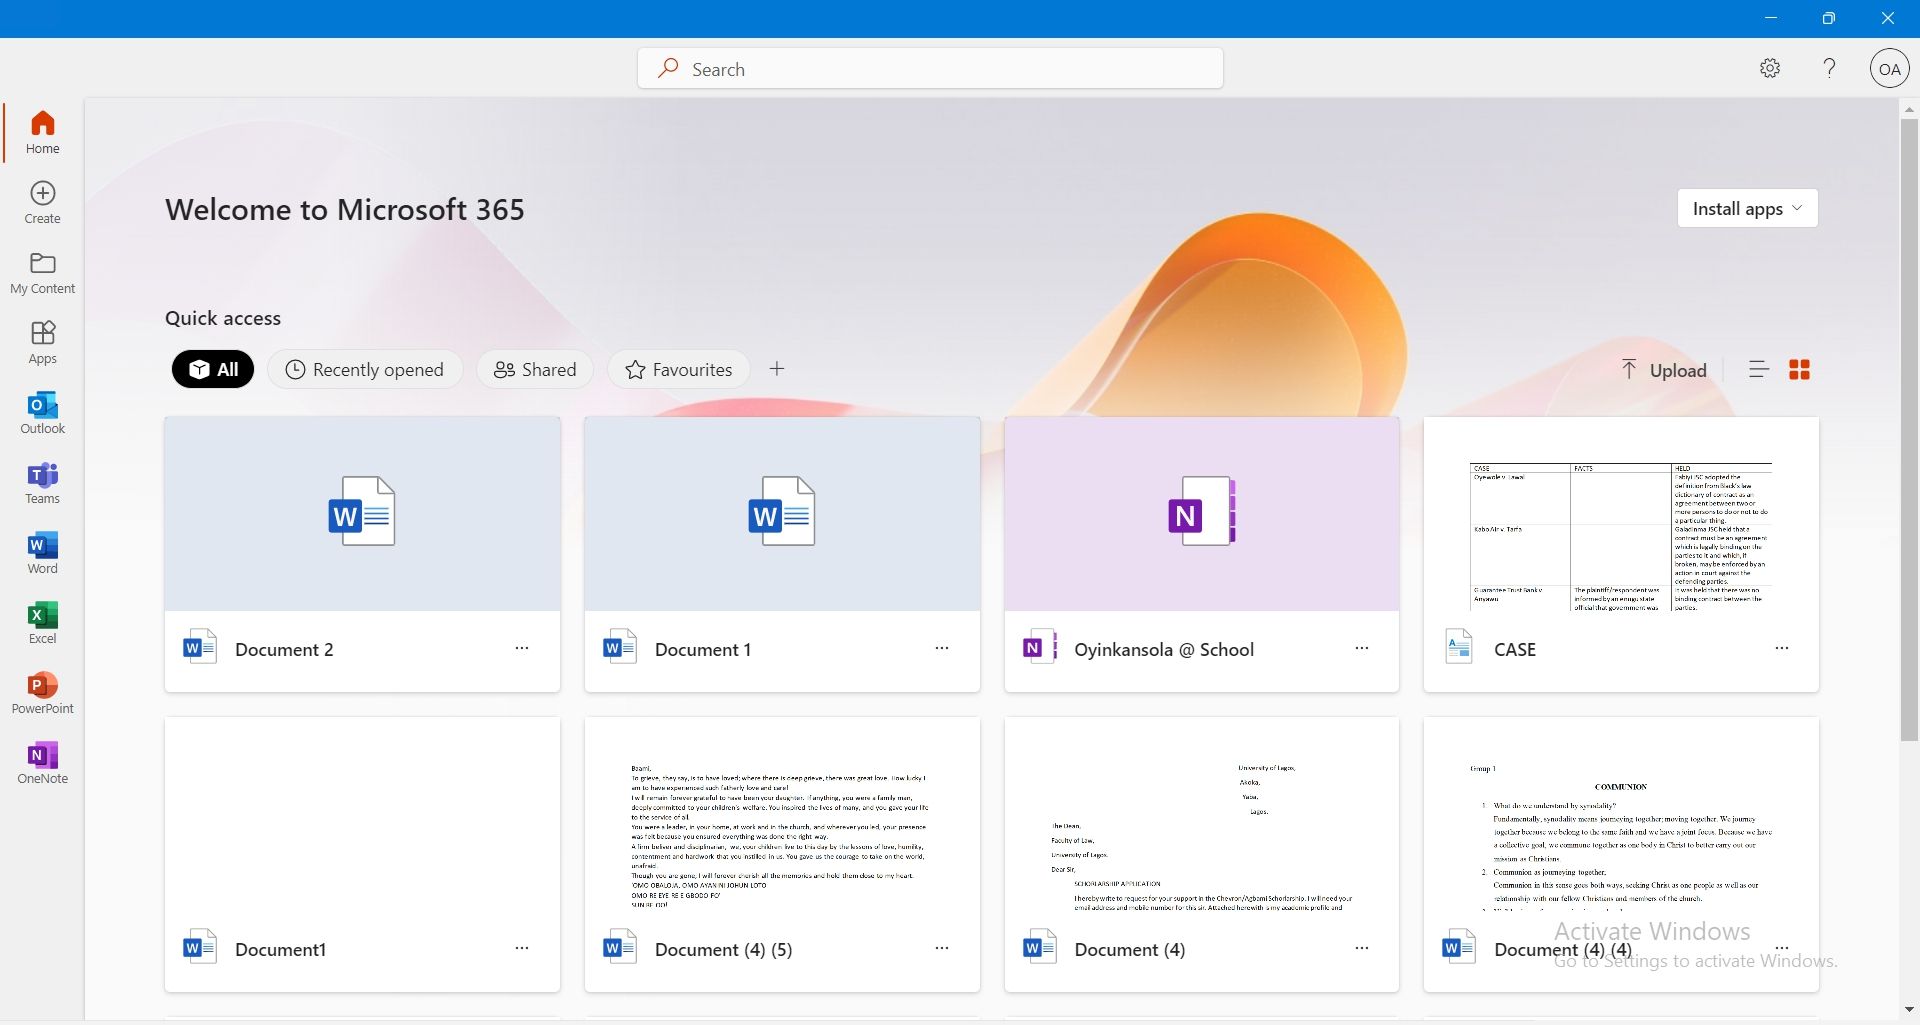 The High 6 Options of the Microsoft 365 App